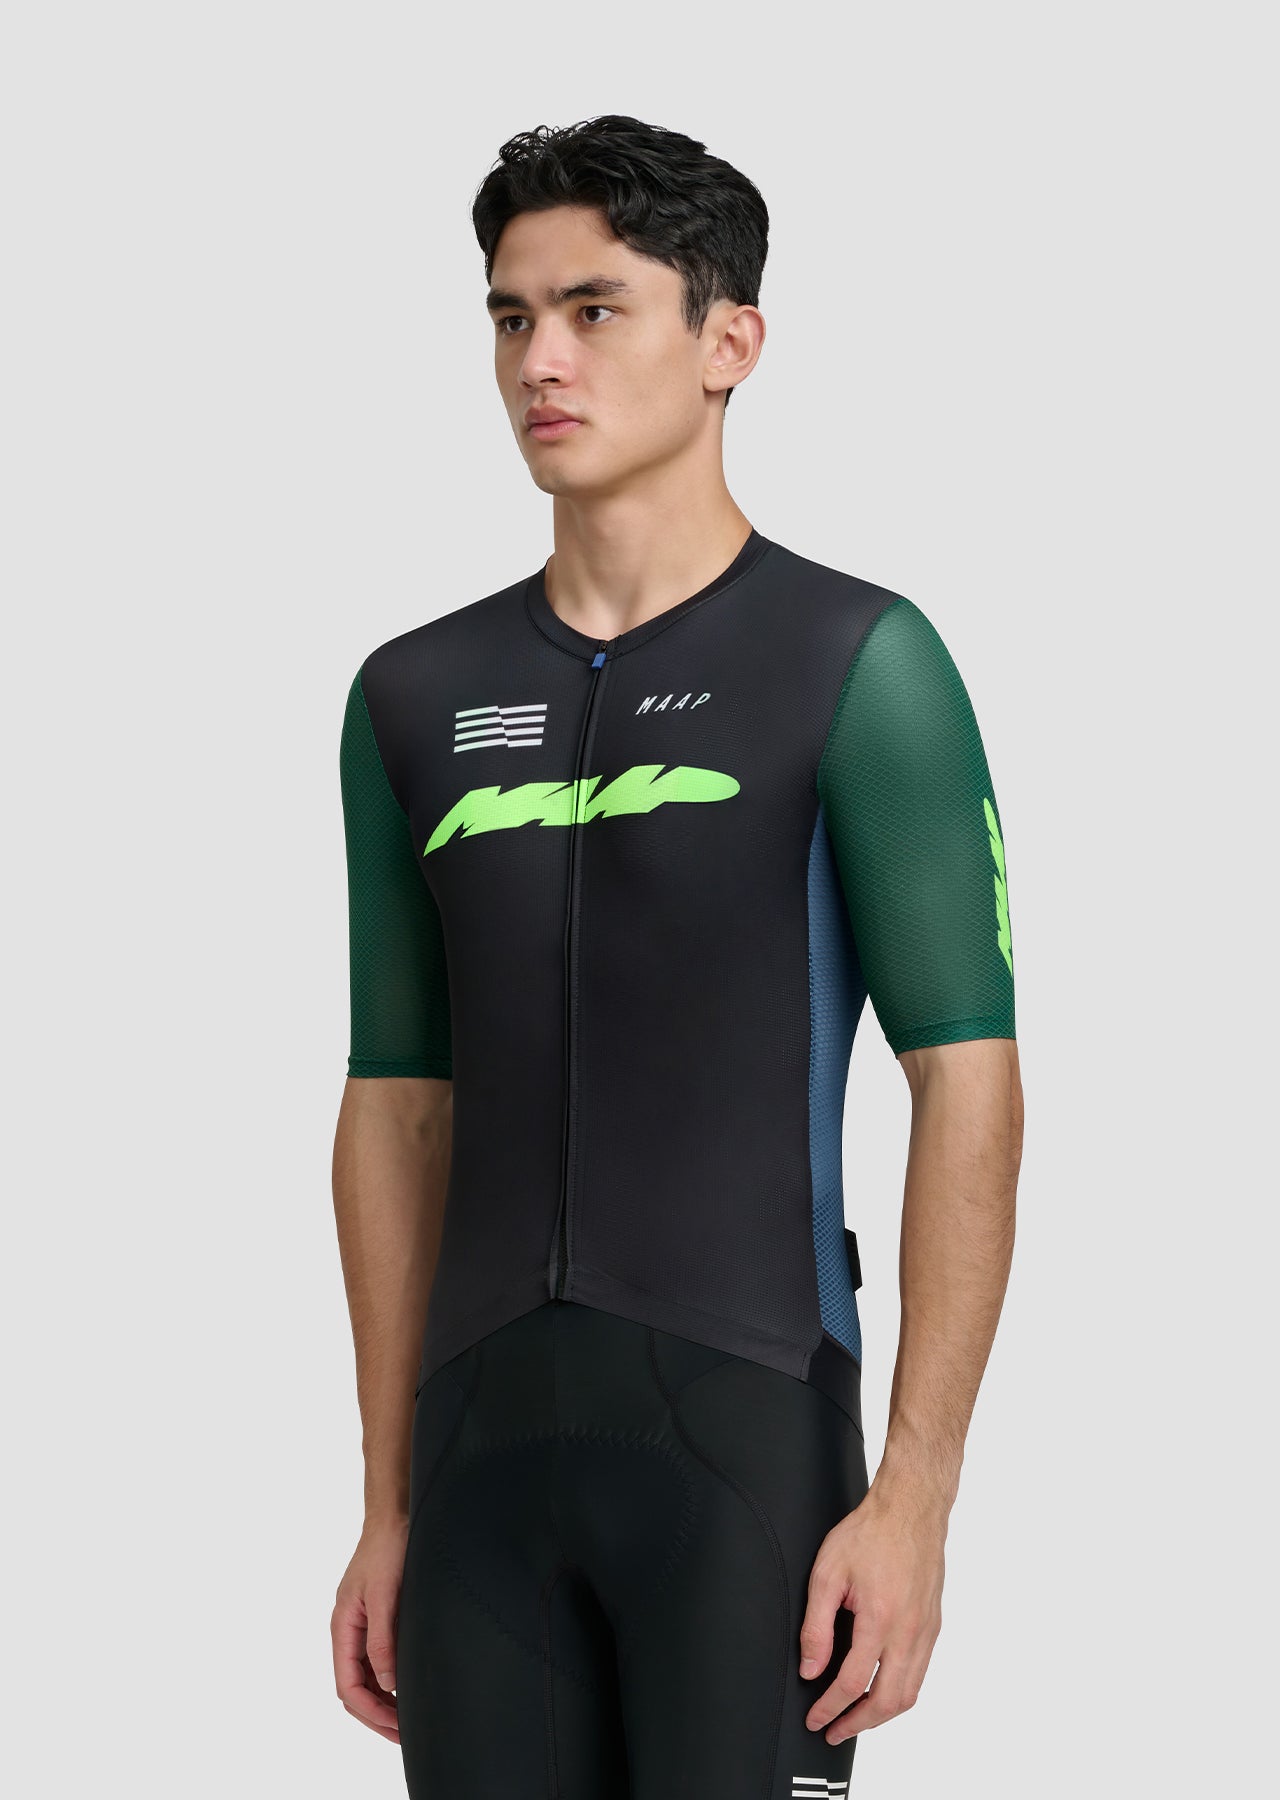 Eclipse Pro Air Jersey 2.0